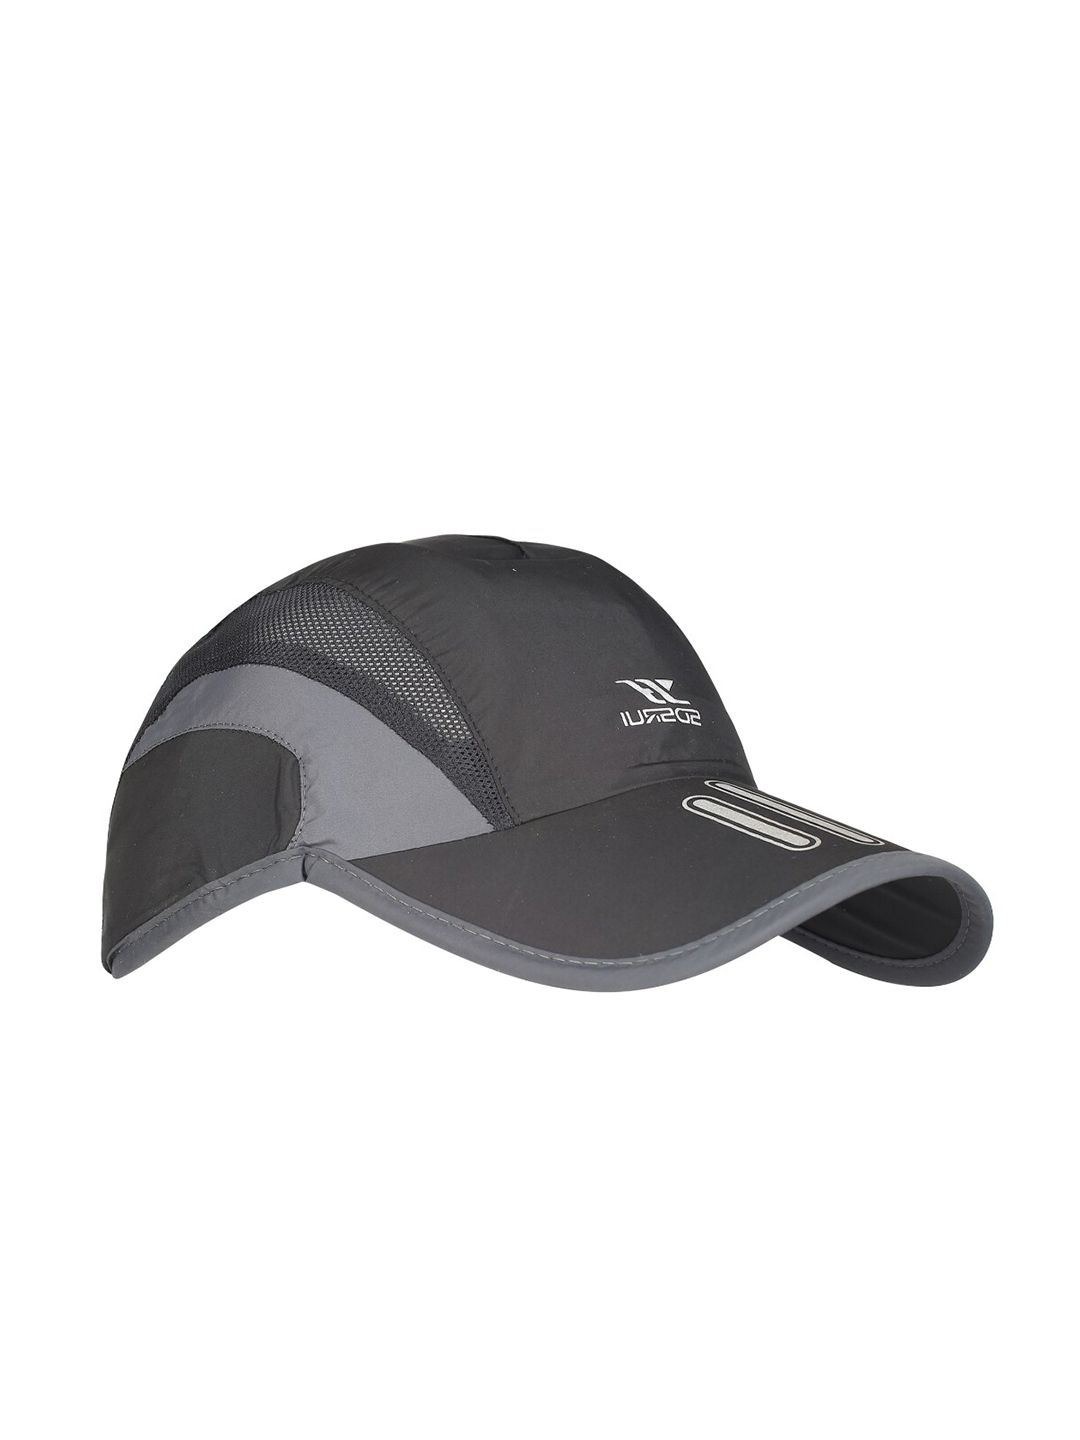 iSWEVEN Unisex Black & Grey Solid Snapback Cap Price in India